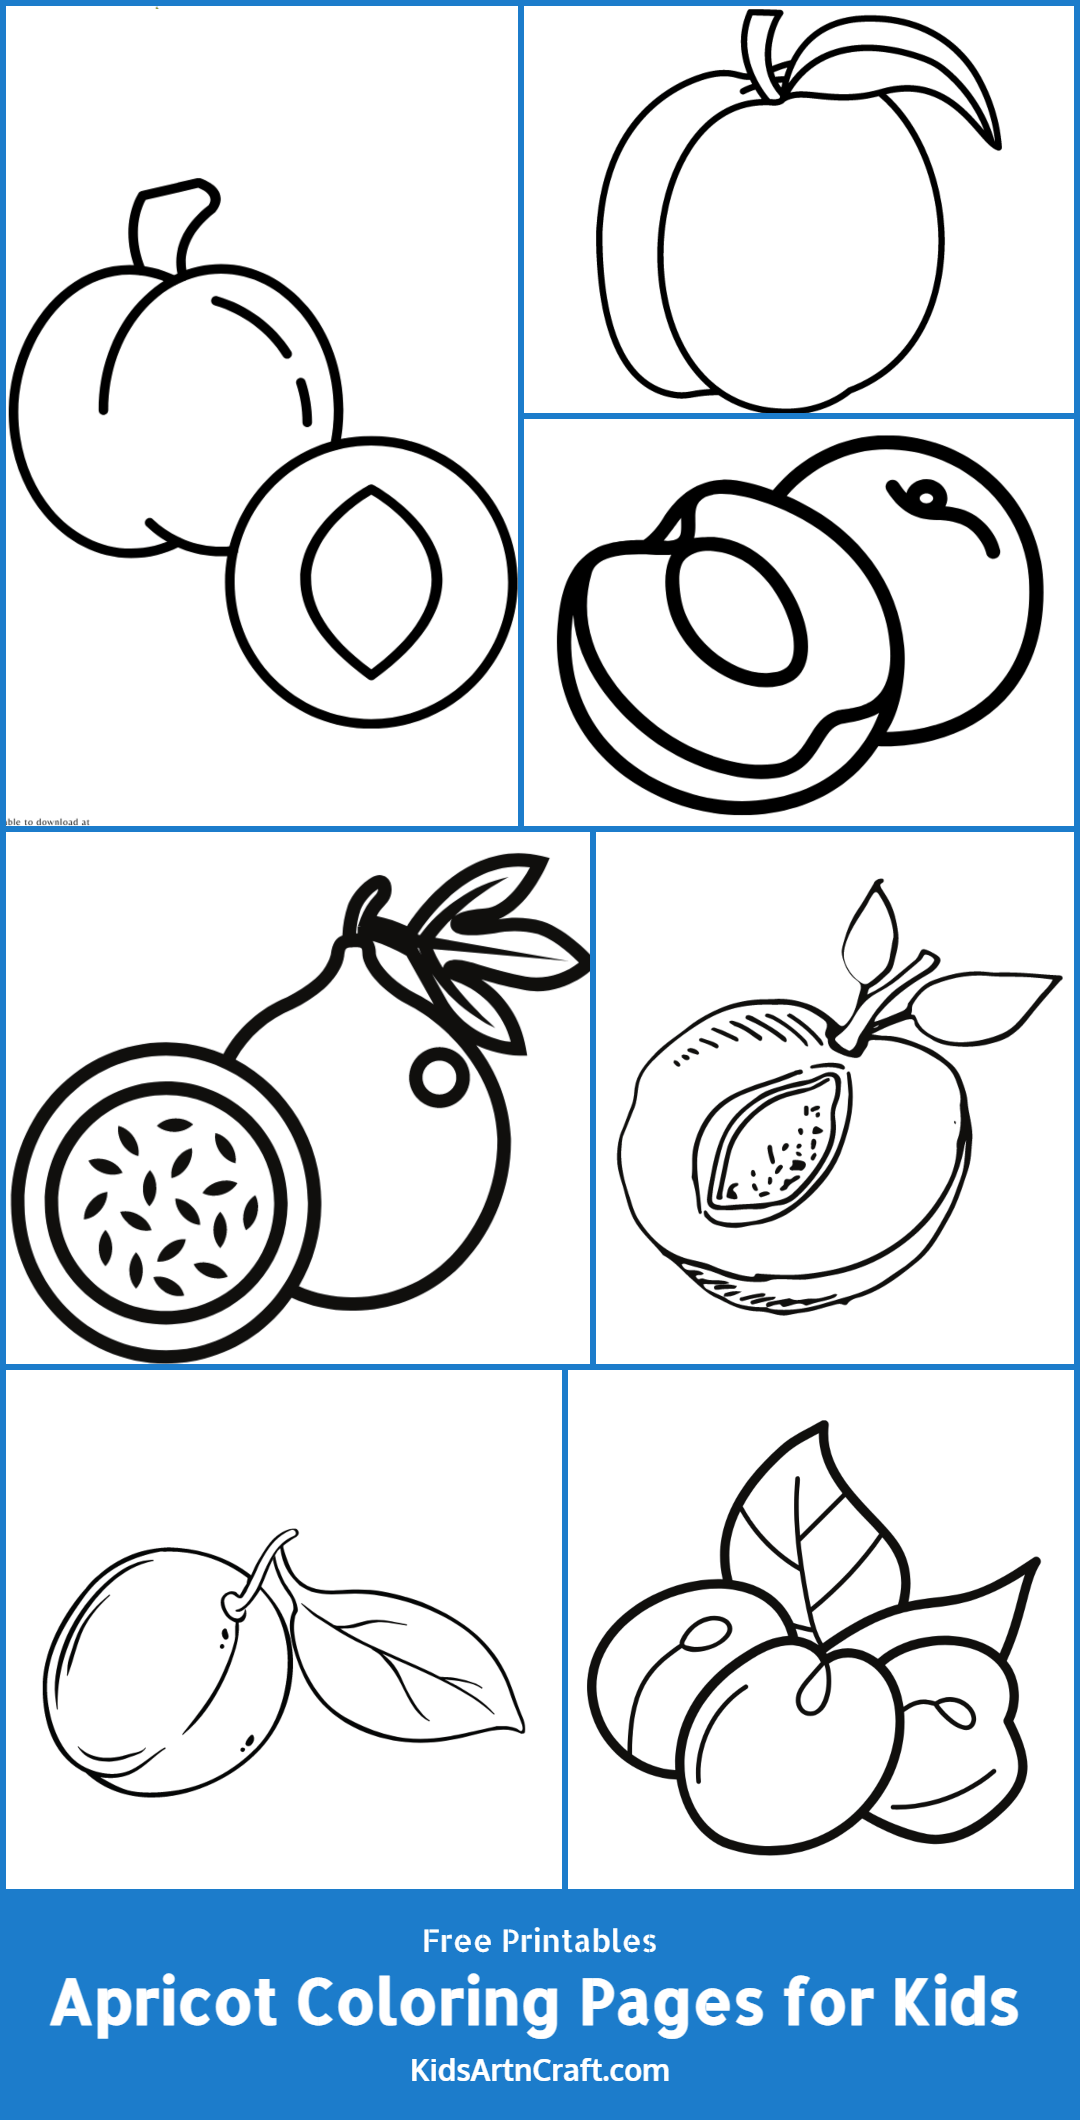 Apricot Coloring Pages For Kids – Free Printables